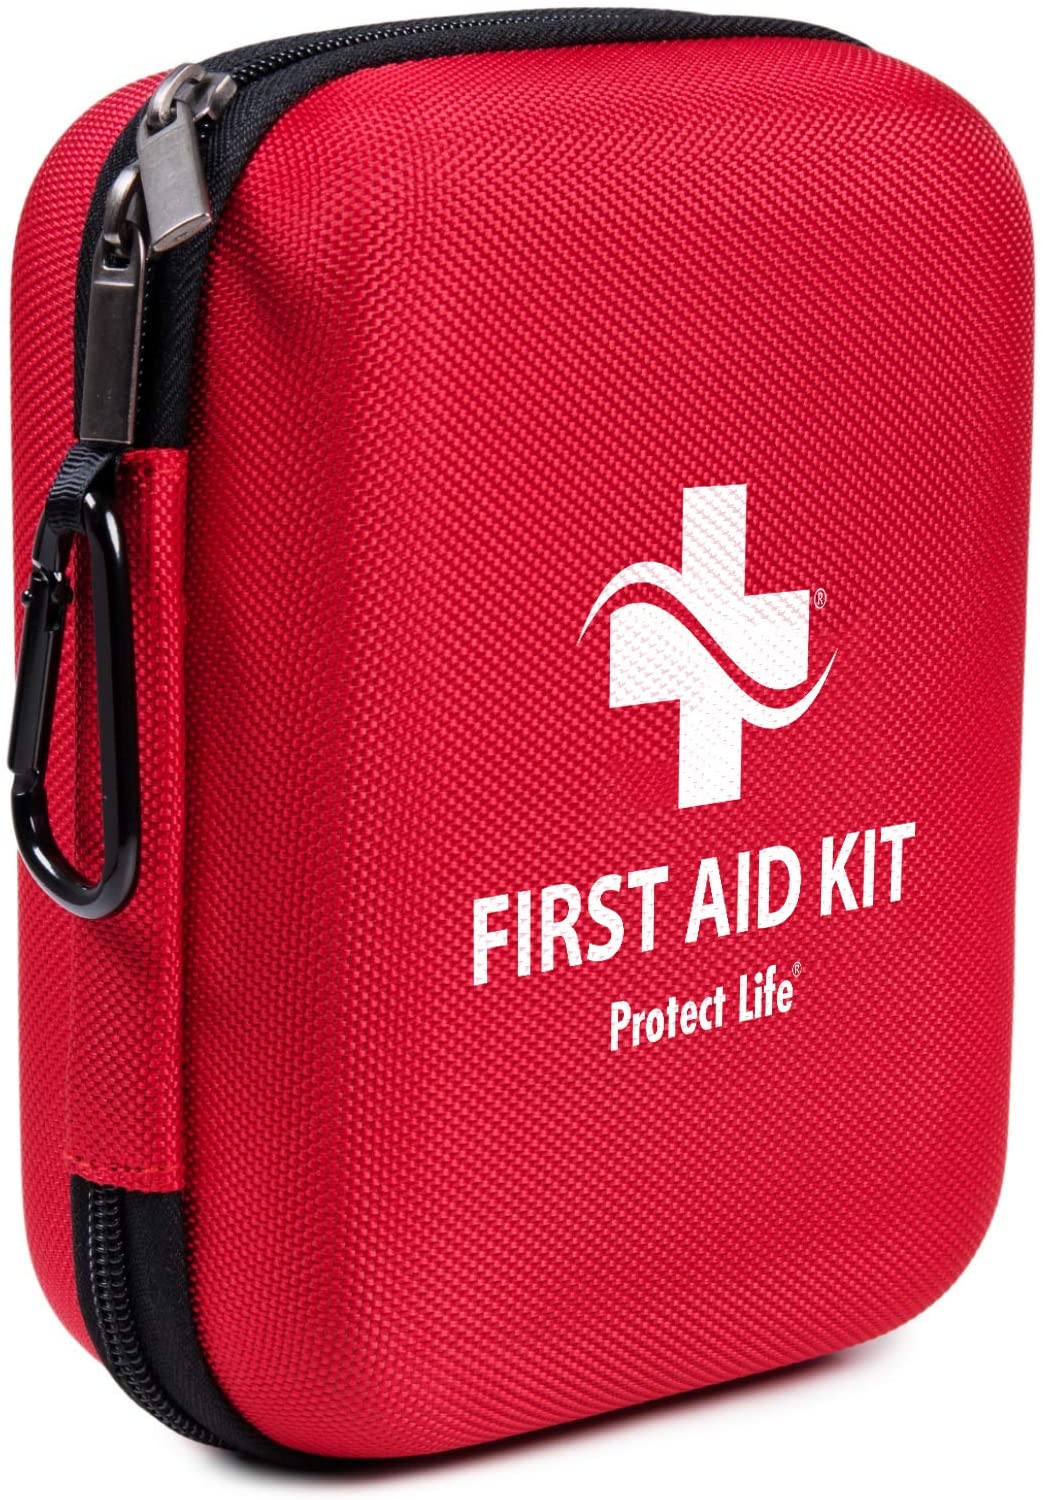 Protect Life FDA-Approved First Aid Emergency Kit, 200-Piece